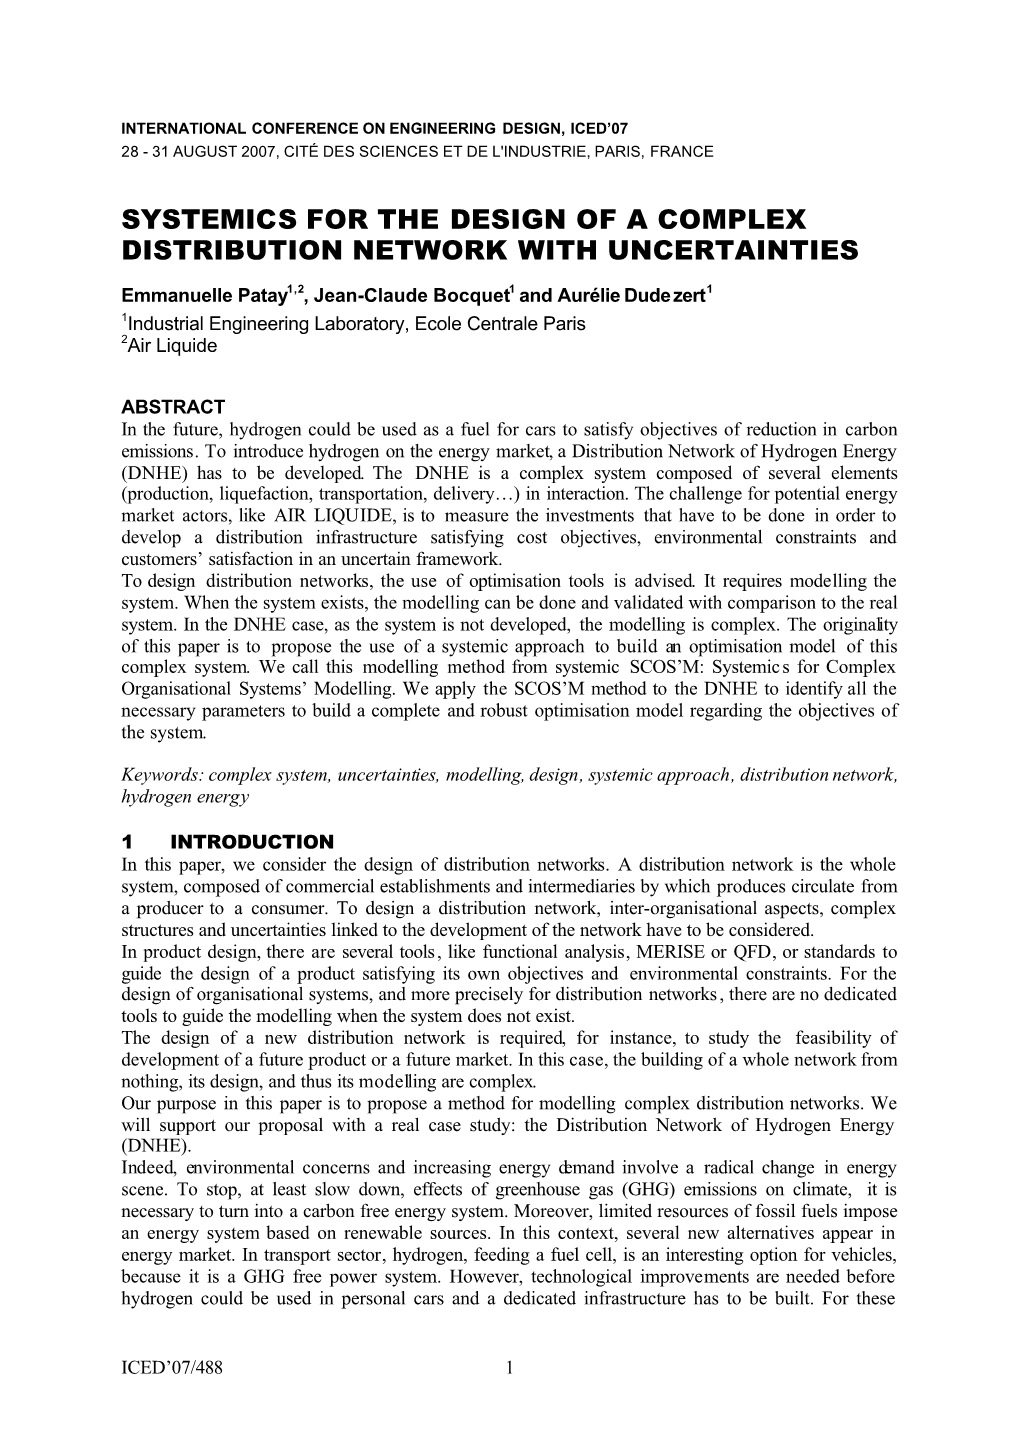 Systemics for the Design of a Complex Distribution Network with Uncertainties